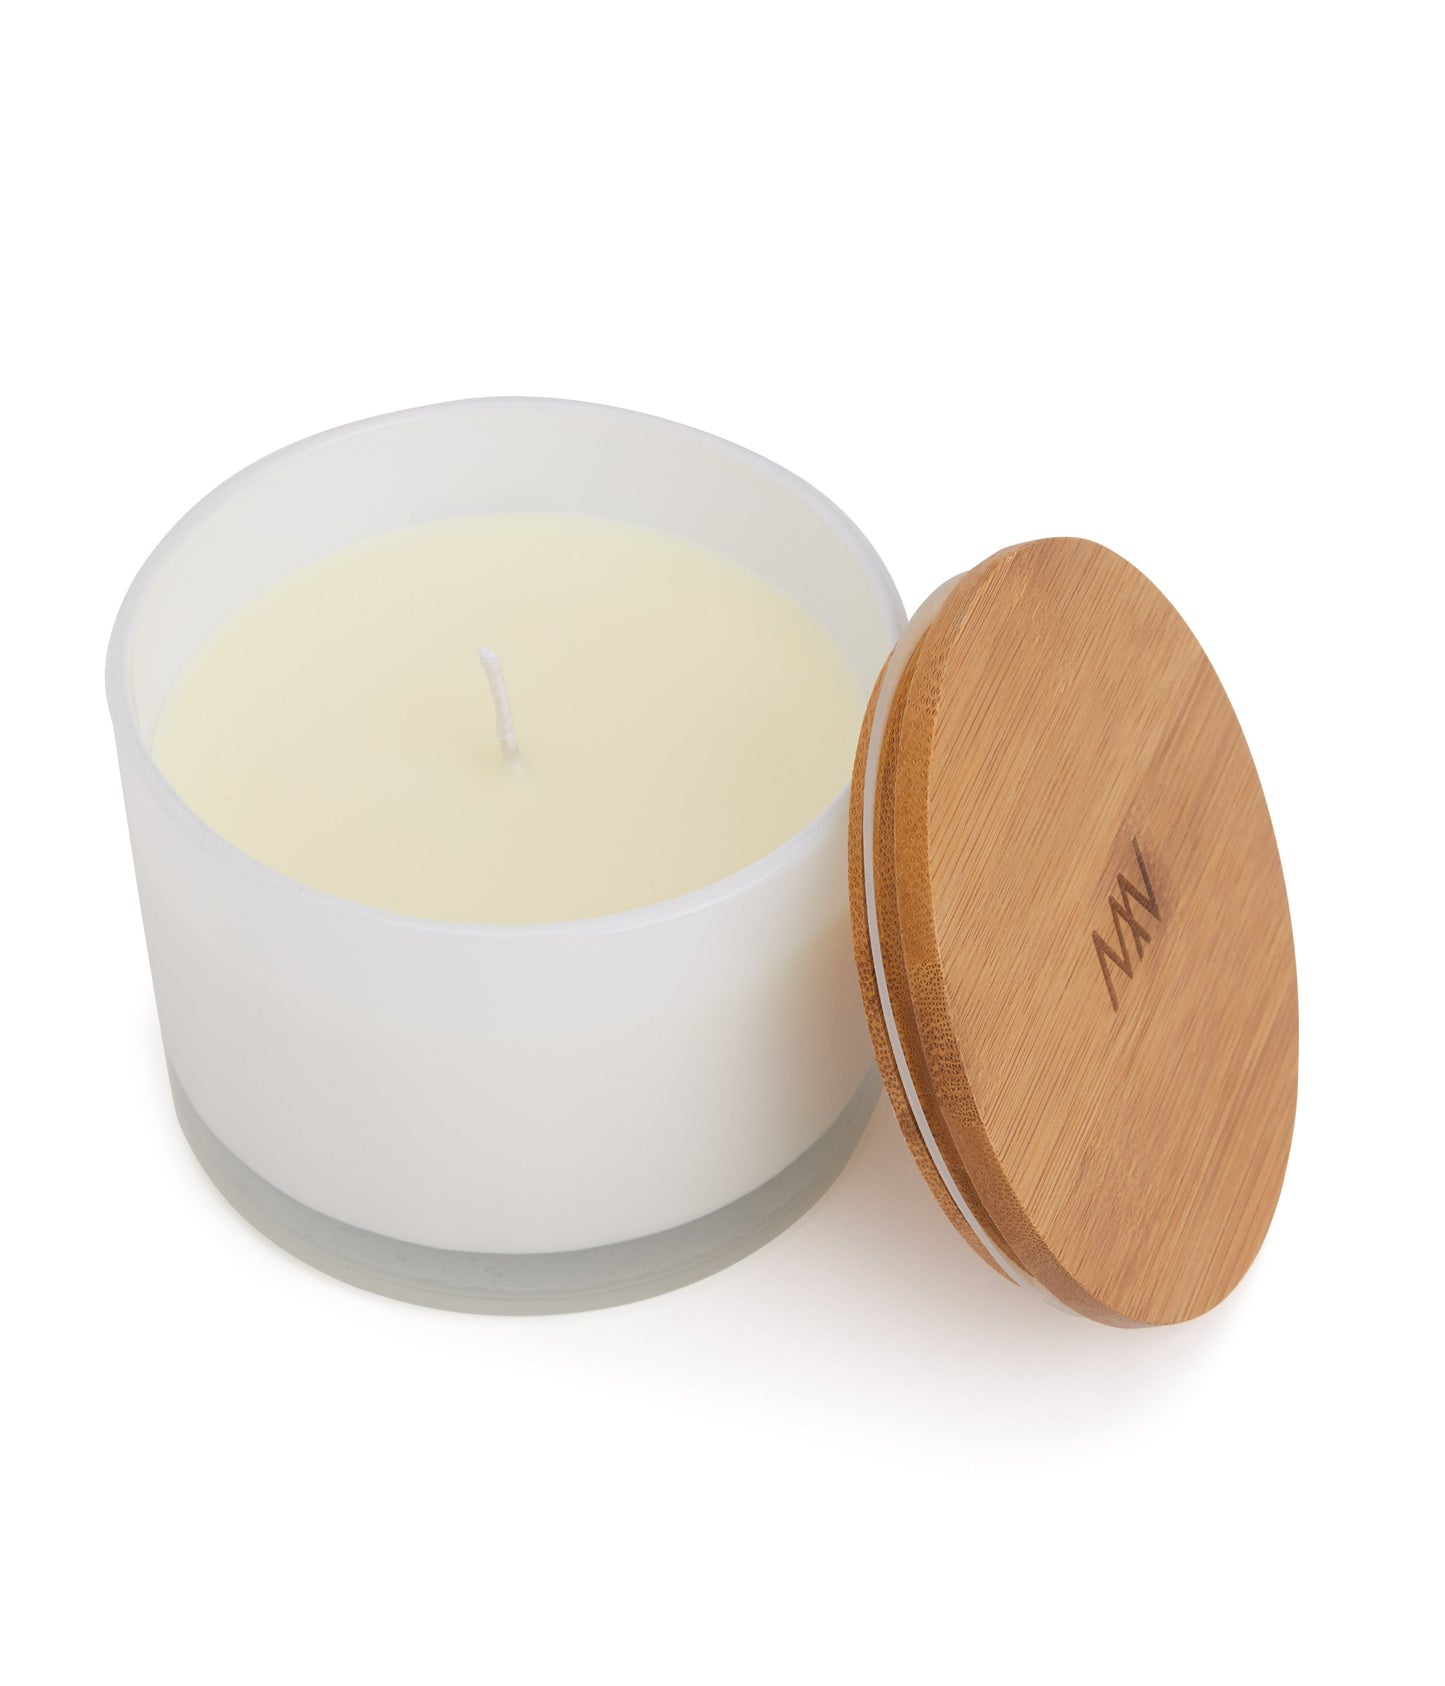 The Future Is Bright Large Soy Candle | Color: White - variant::white